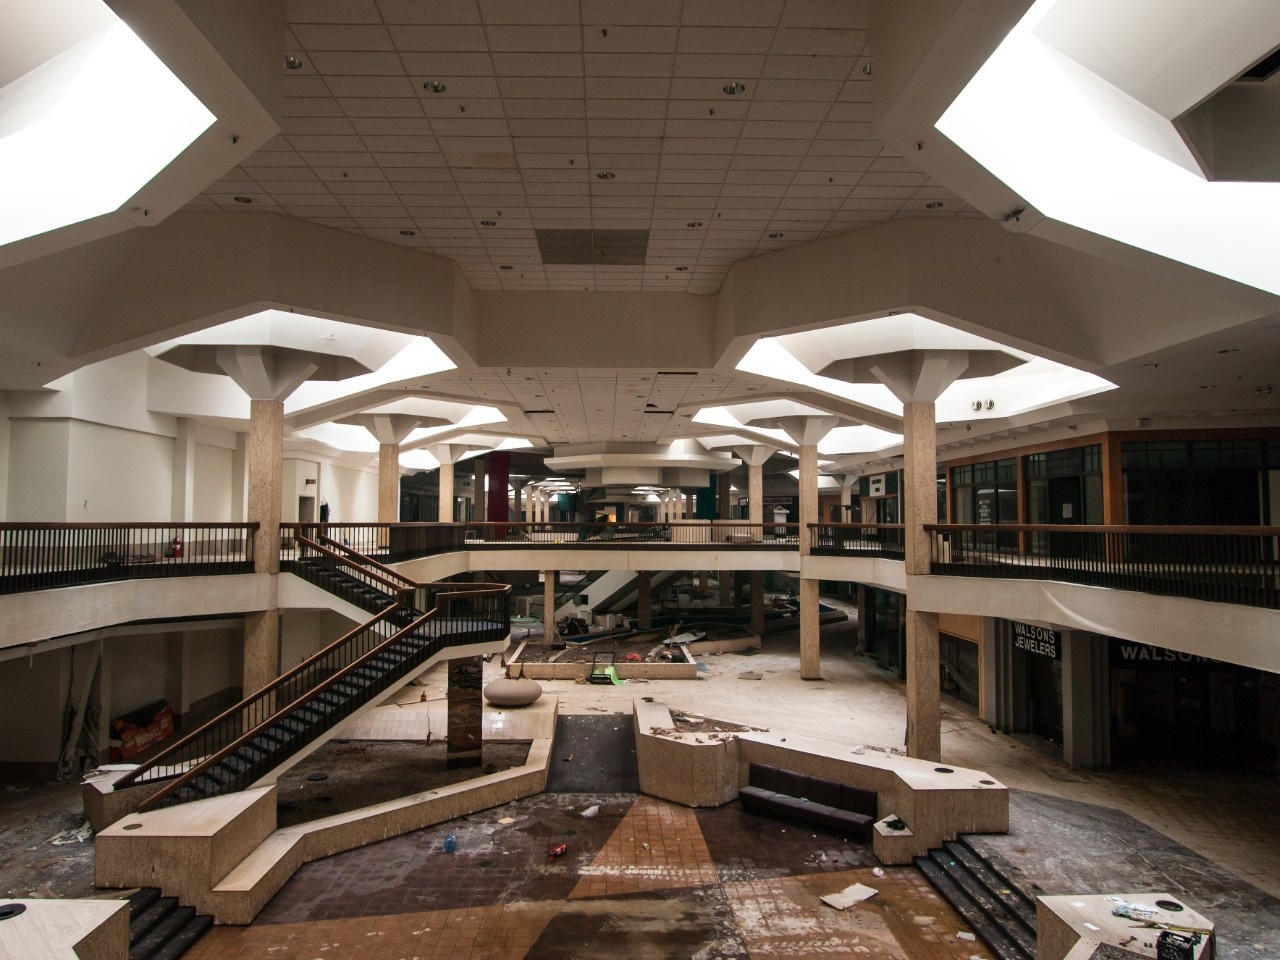 The Randall Park Mall, a 2-million-square-foot shopping center that opened in Randall, Ohio, in 1976 and closed in 2009. In 1995, 120 stores employed 5,000 people in the mall, but by 2008 it was basically empty. Destruction began on the mall in 2014 and it was replaced by an industrial park. 